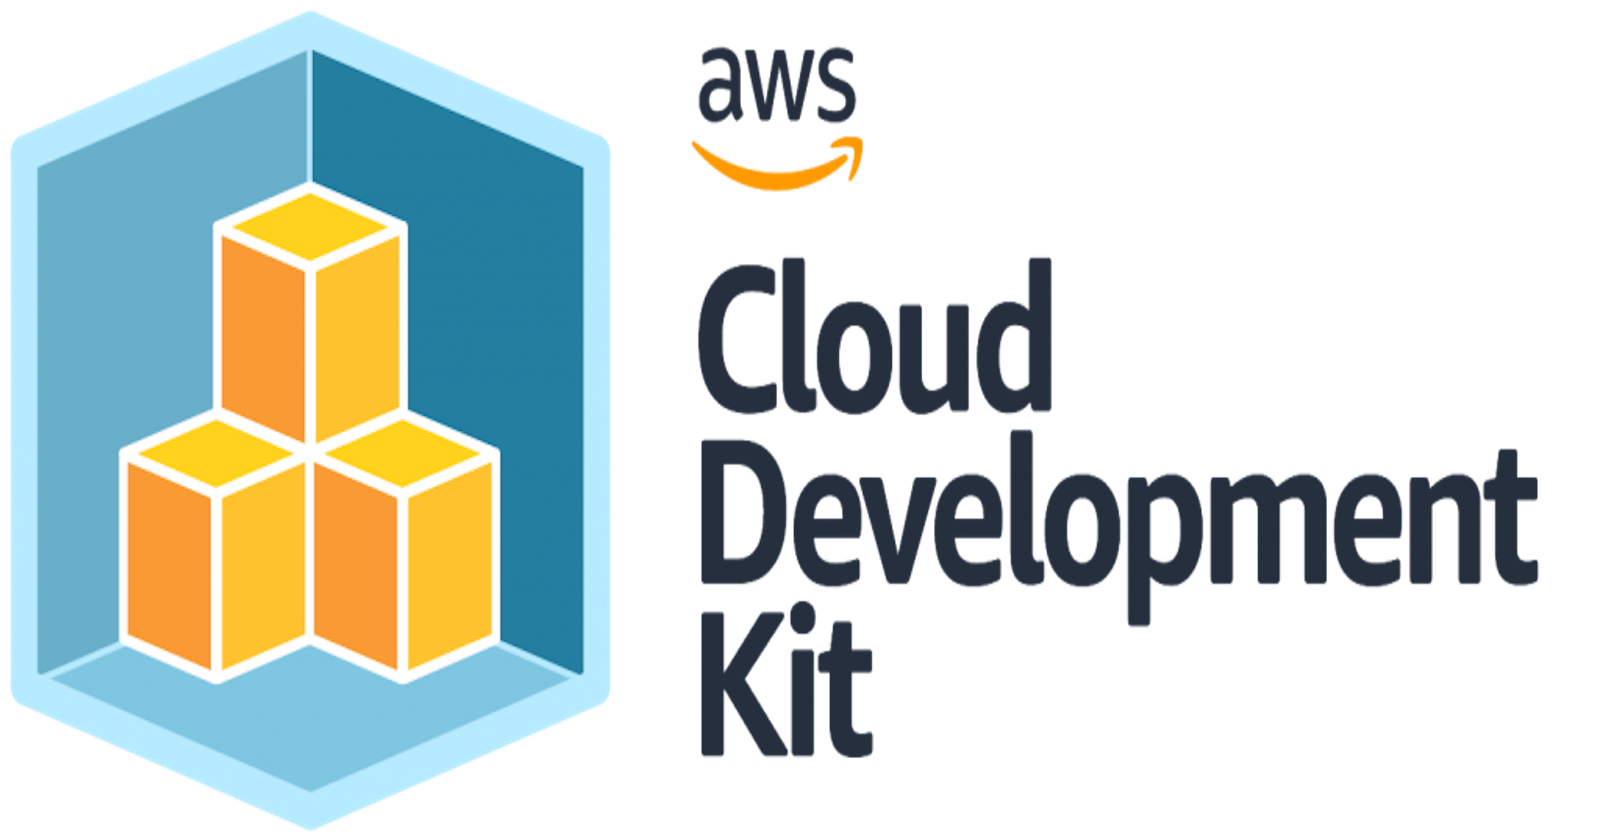 How to migrate AWS CloudFormation templated resources to CDK